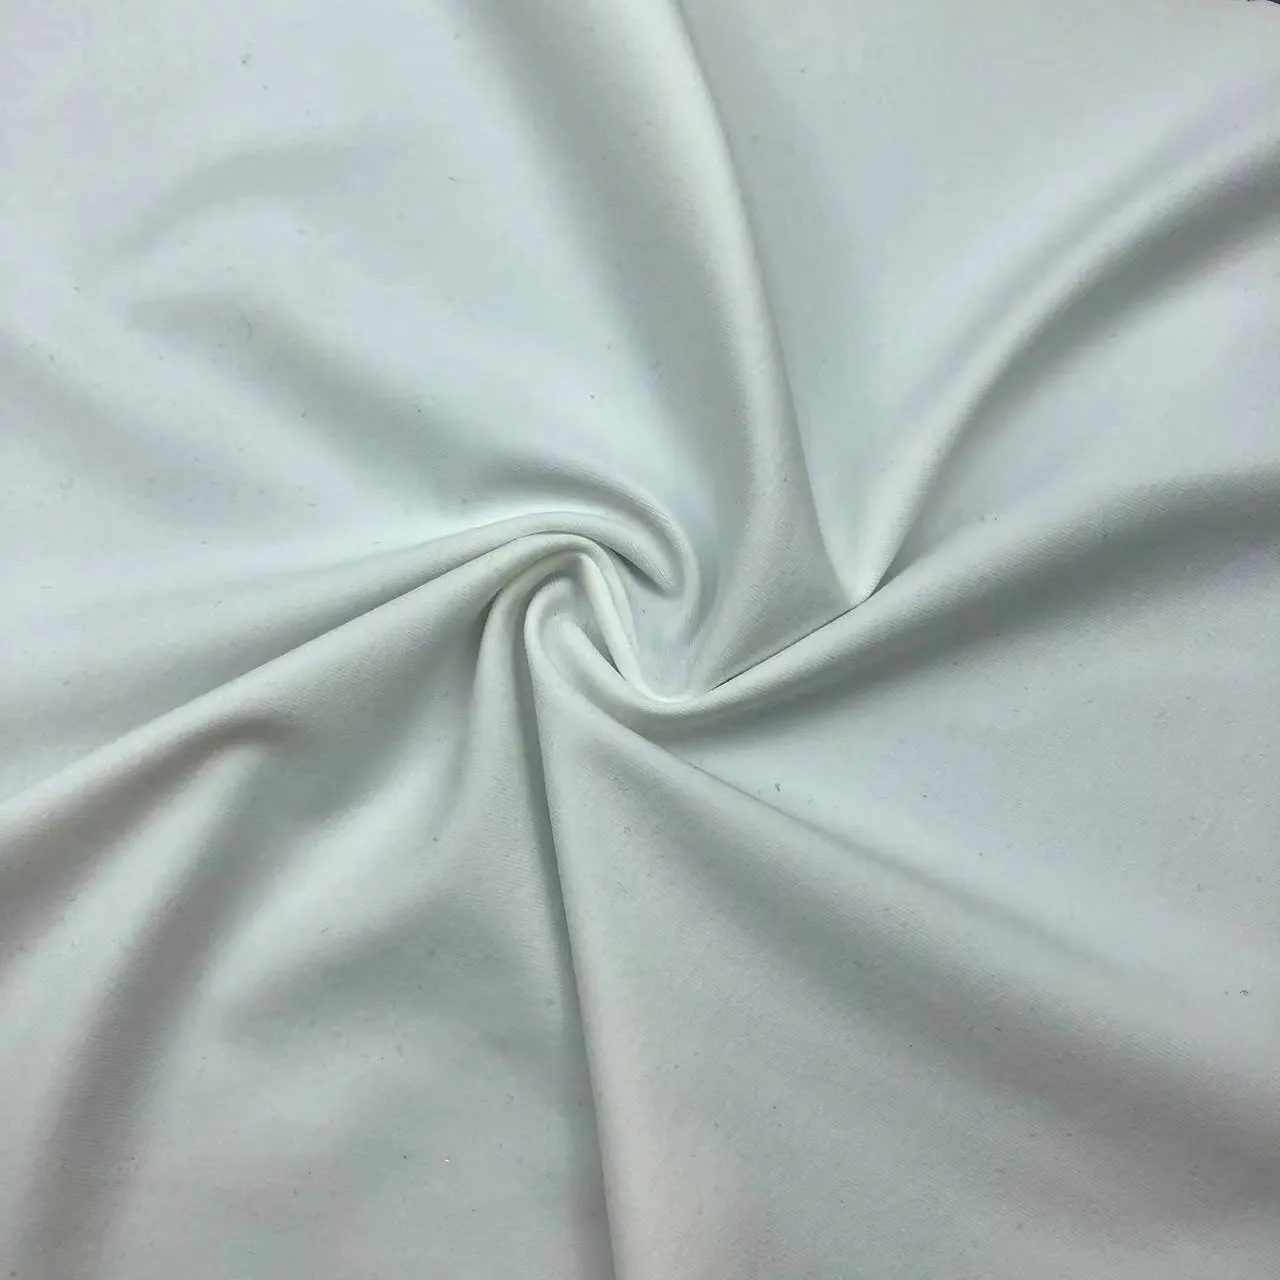 Soft touch breathable high elastic spandex15 nylon 85 fabric for underwear and swimsuit